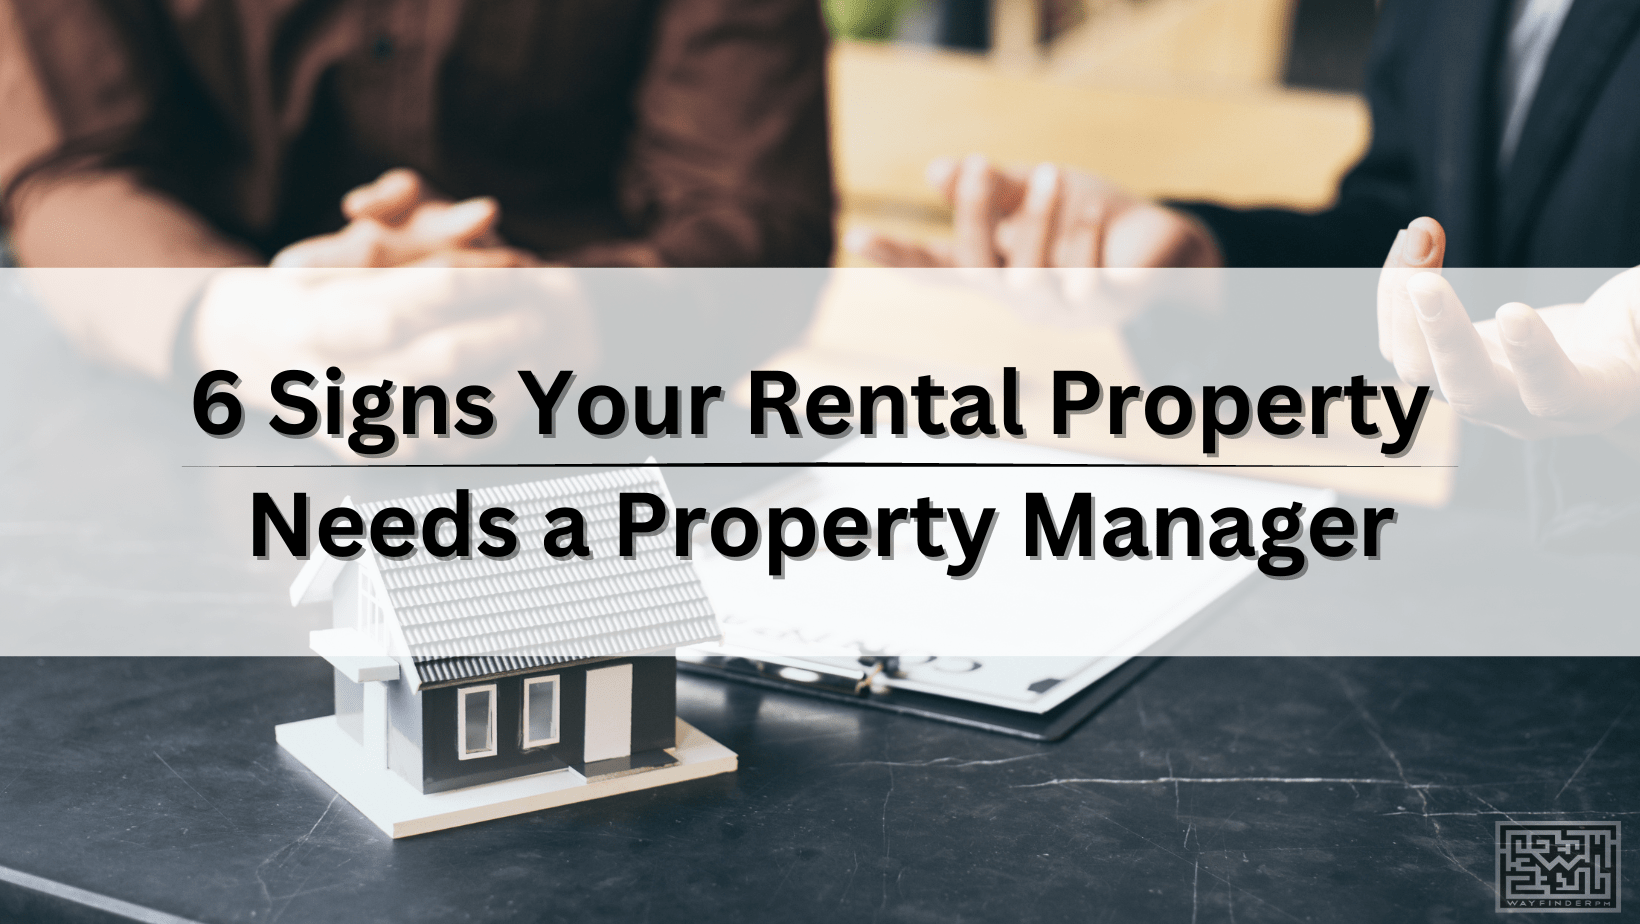 6 Signs Your Rental Property Needs a Property Manager